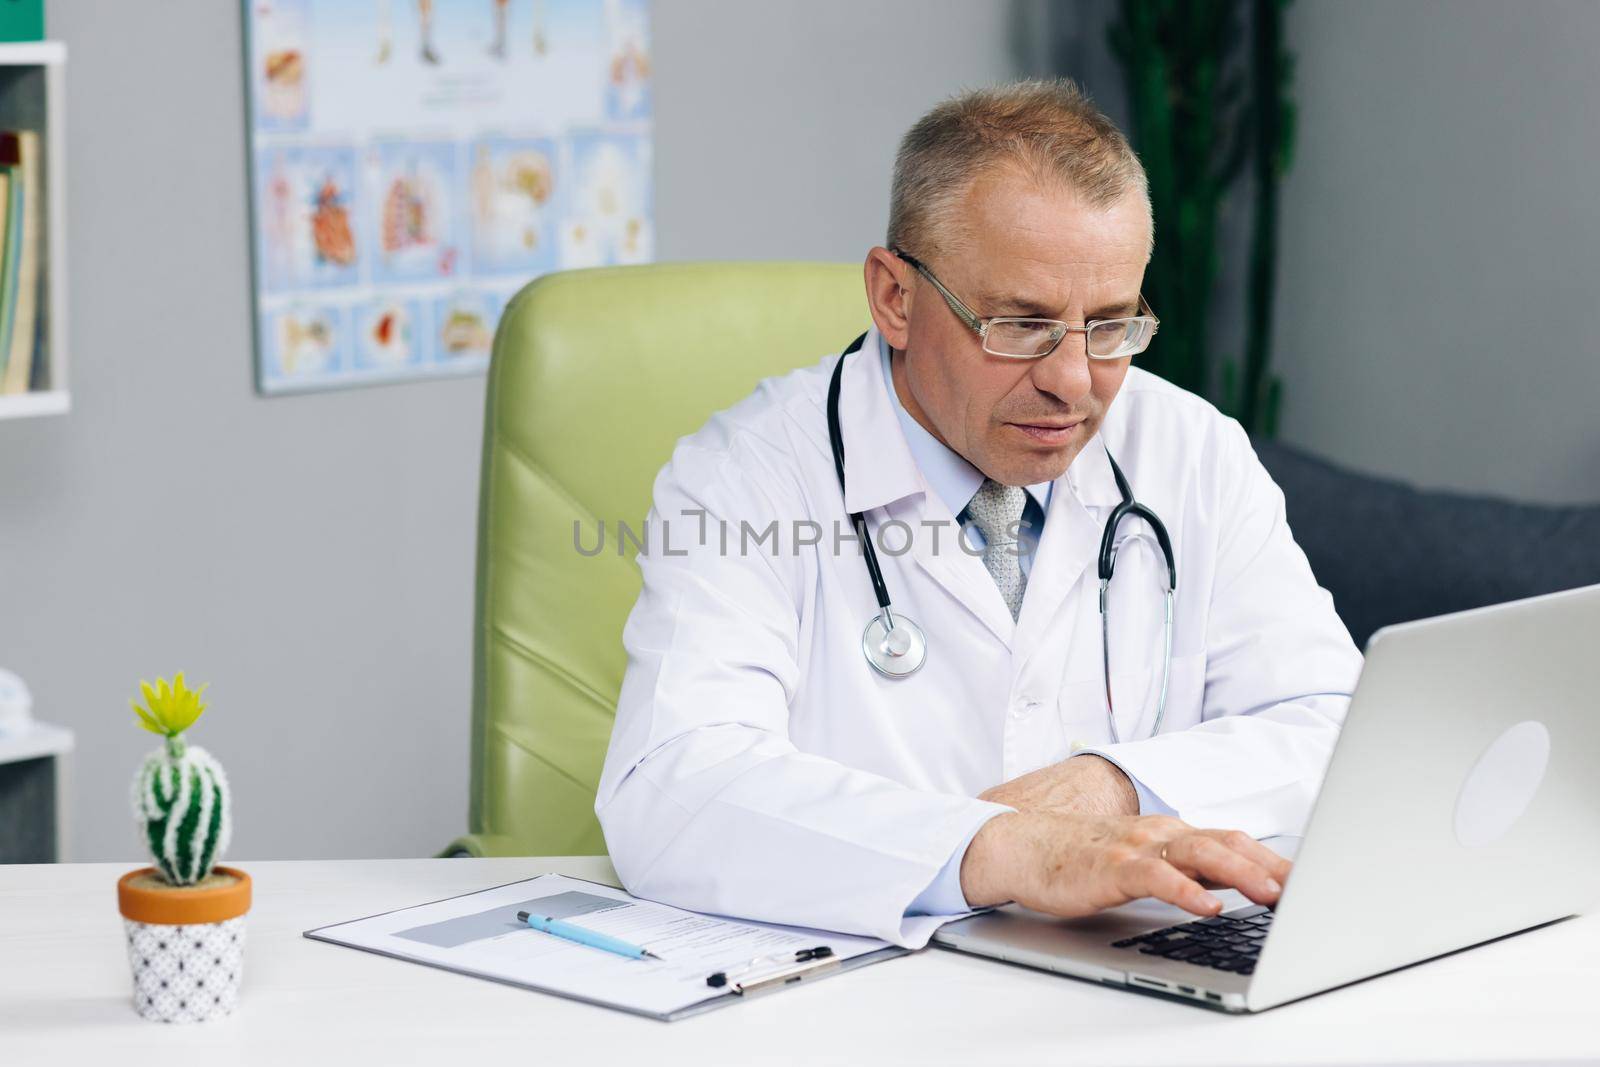 Physician in White Lab Coat is Browsing Medical History Behind a Desk in Hospital Office. Calm Family Medical Doctor in Glasses is Working on a Laptop Computer in a Health Clinic.